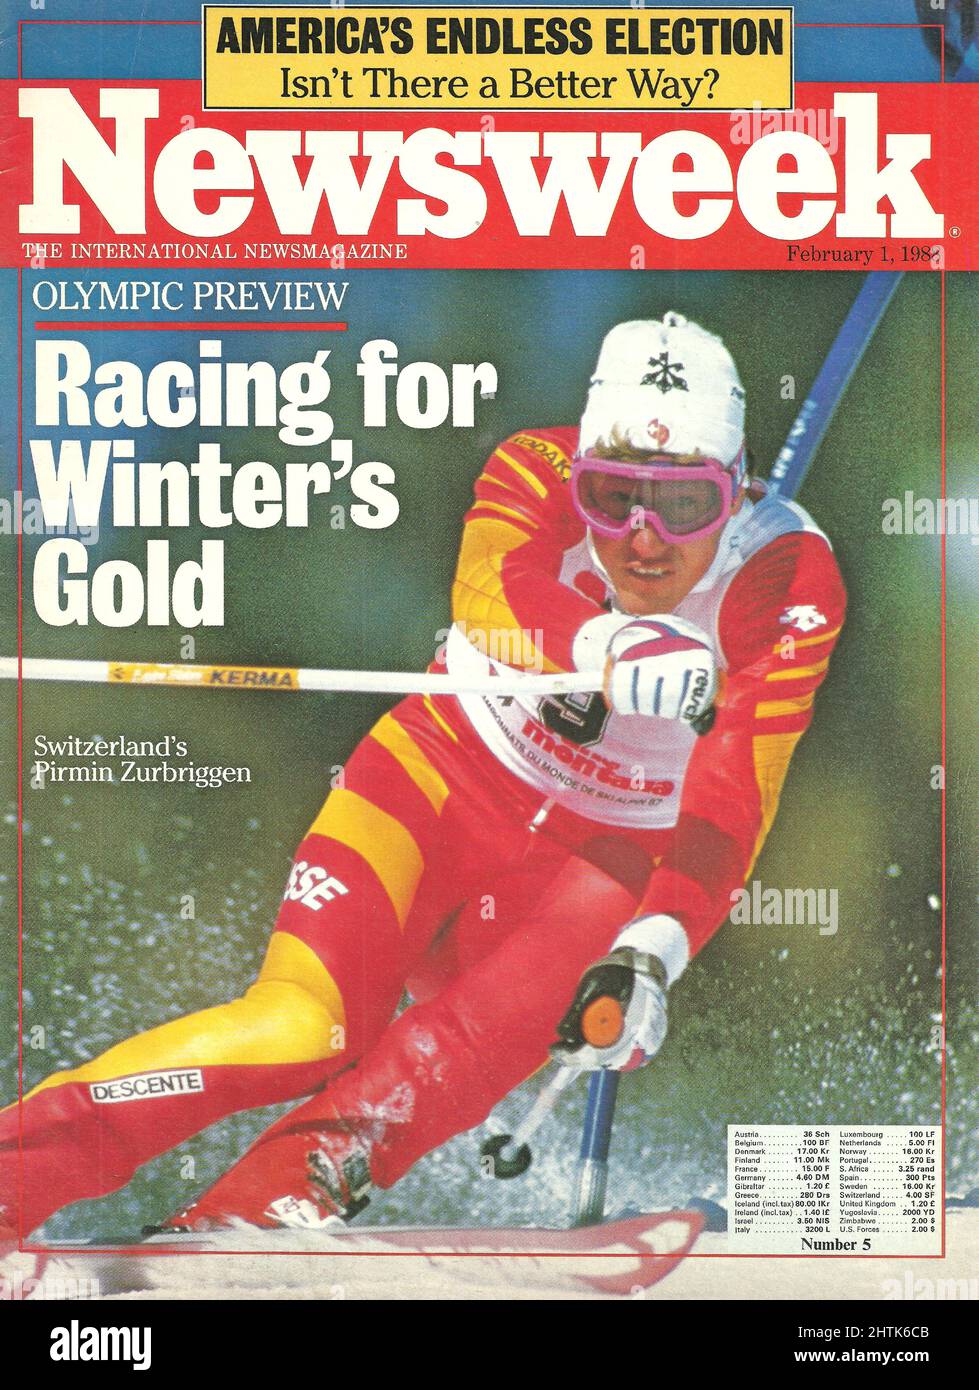 Newsweek cover February 1 1988 Amreica's endless election Olympic preview Racing for winter's gold Switzerland Pirmin Zurbriggen Stock Photo